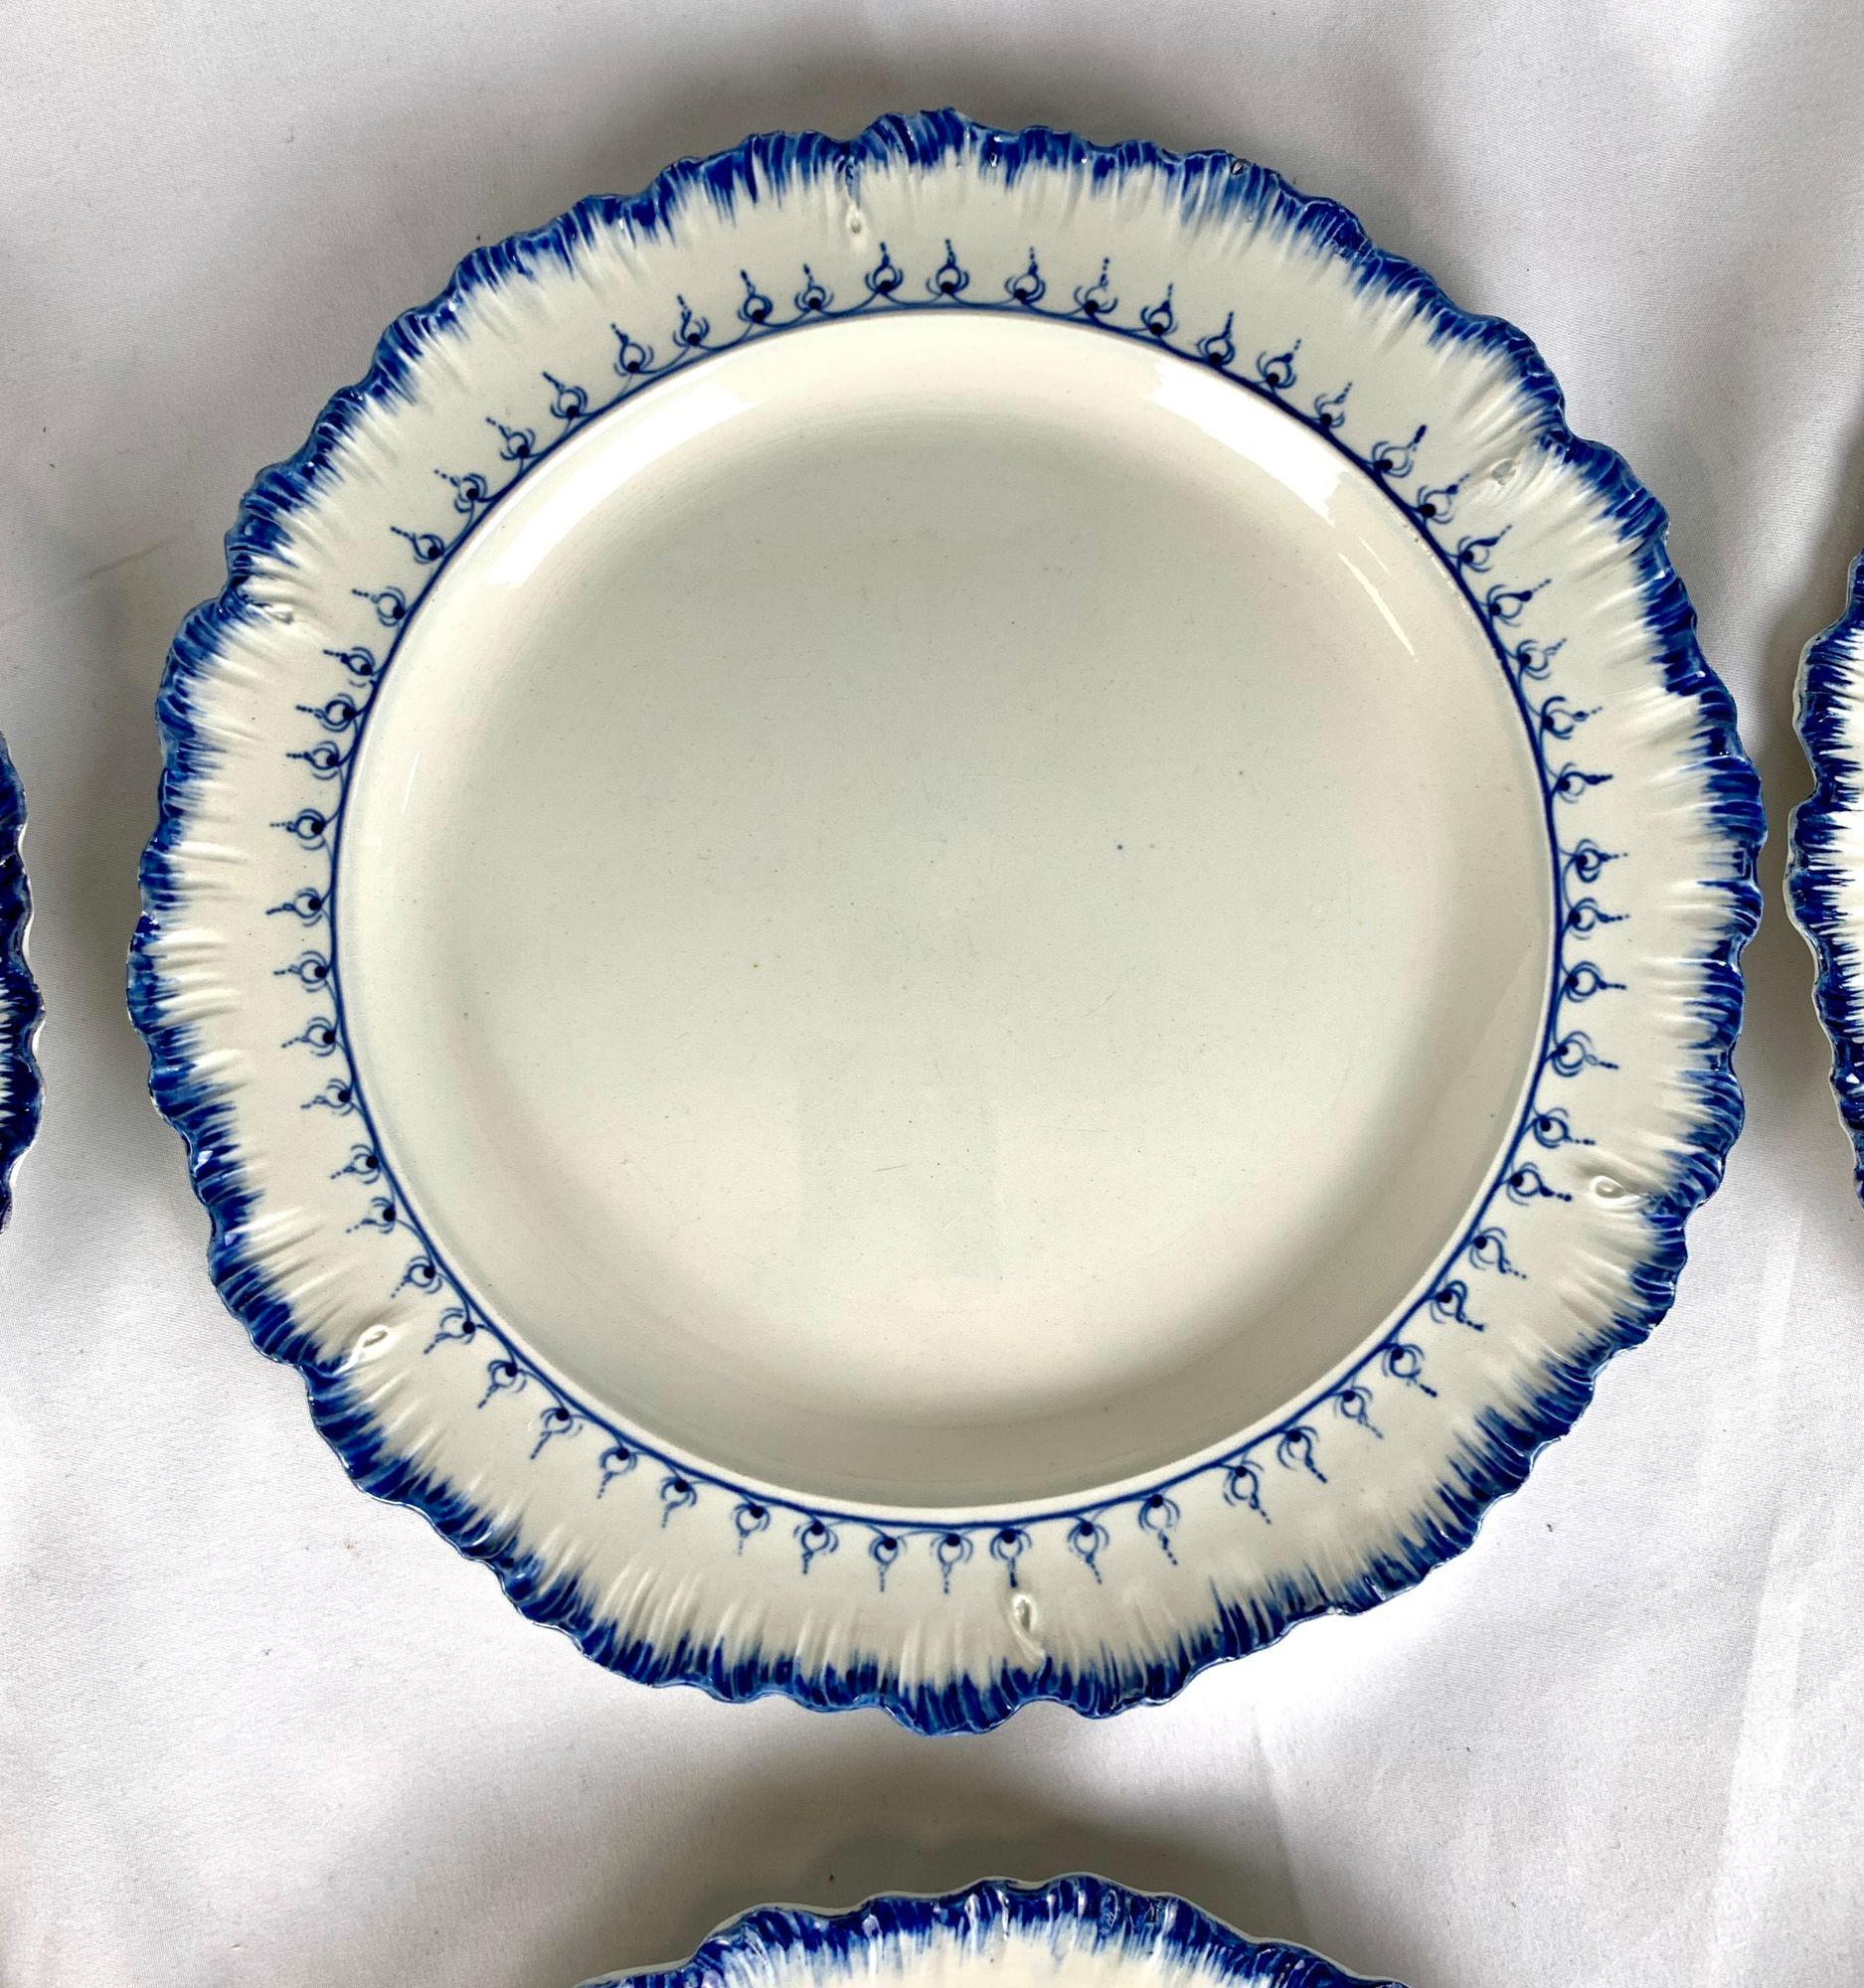 Set Eight Wedgwood Dinner Plates Mared Pattern Made England Circa 1840 In Excellent Condition For Sale In Katonah, NY